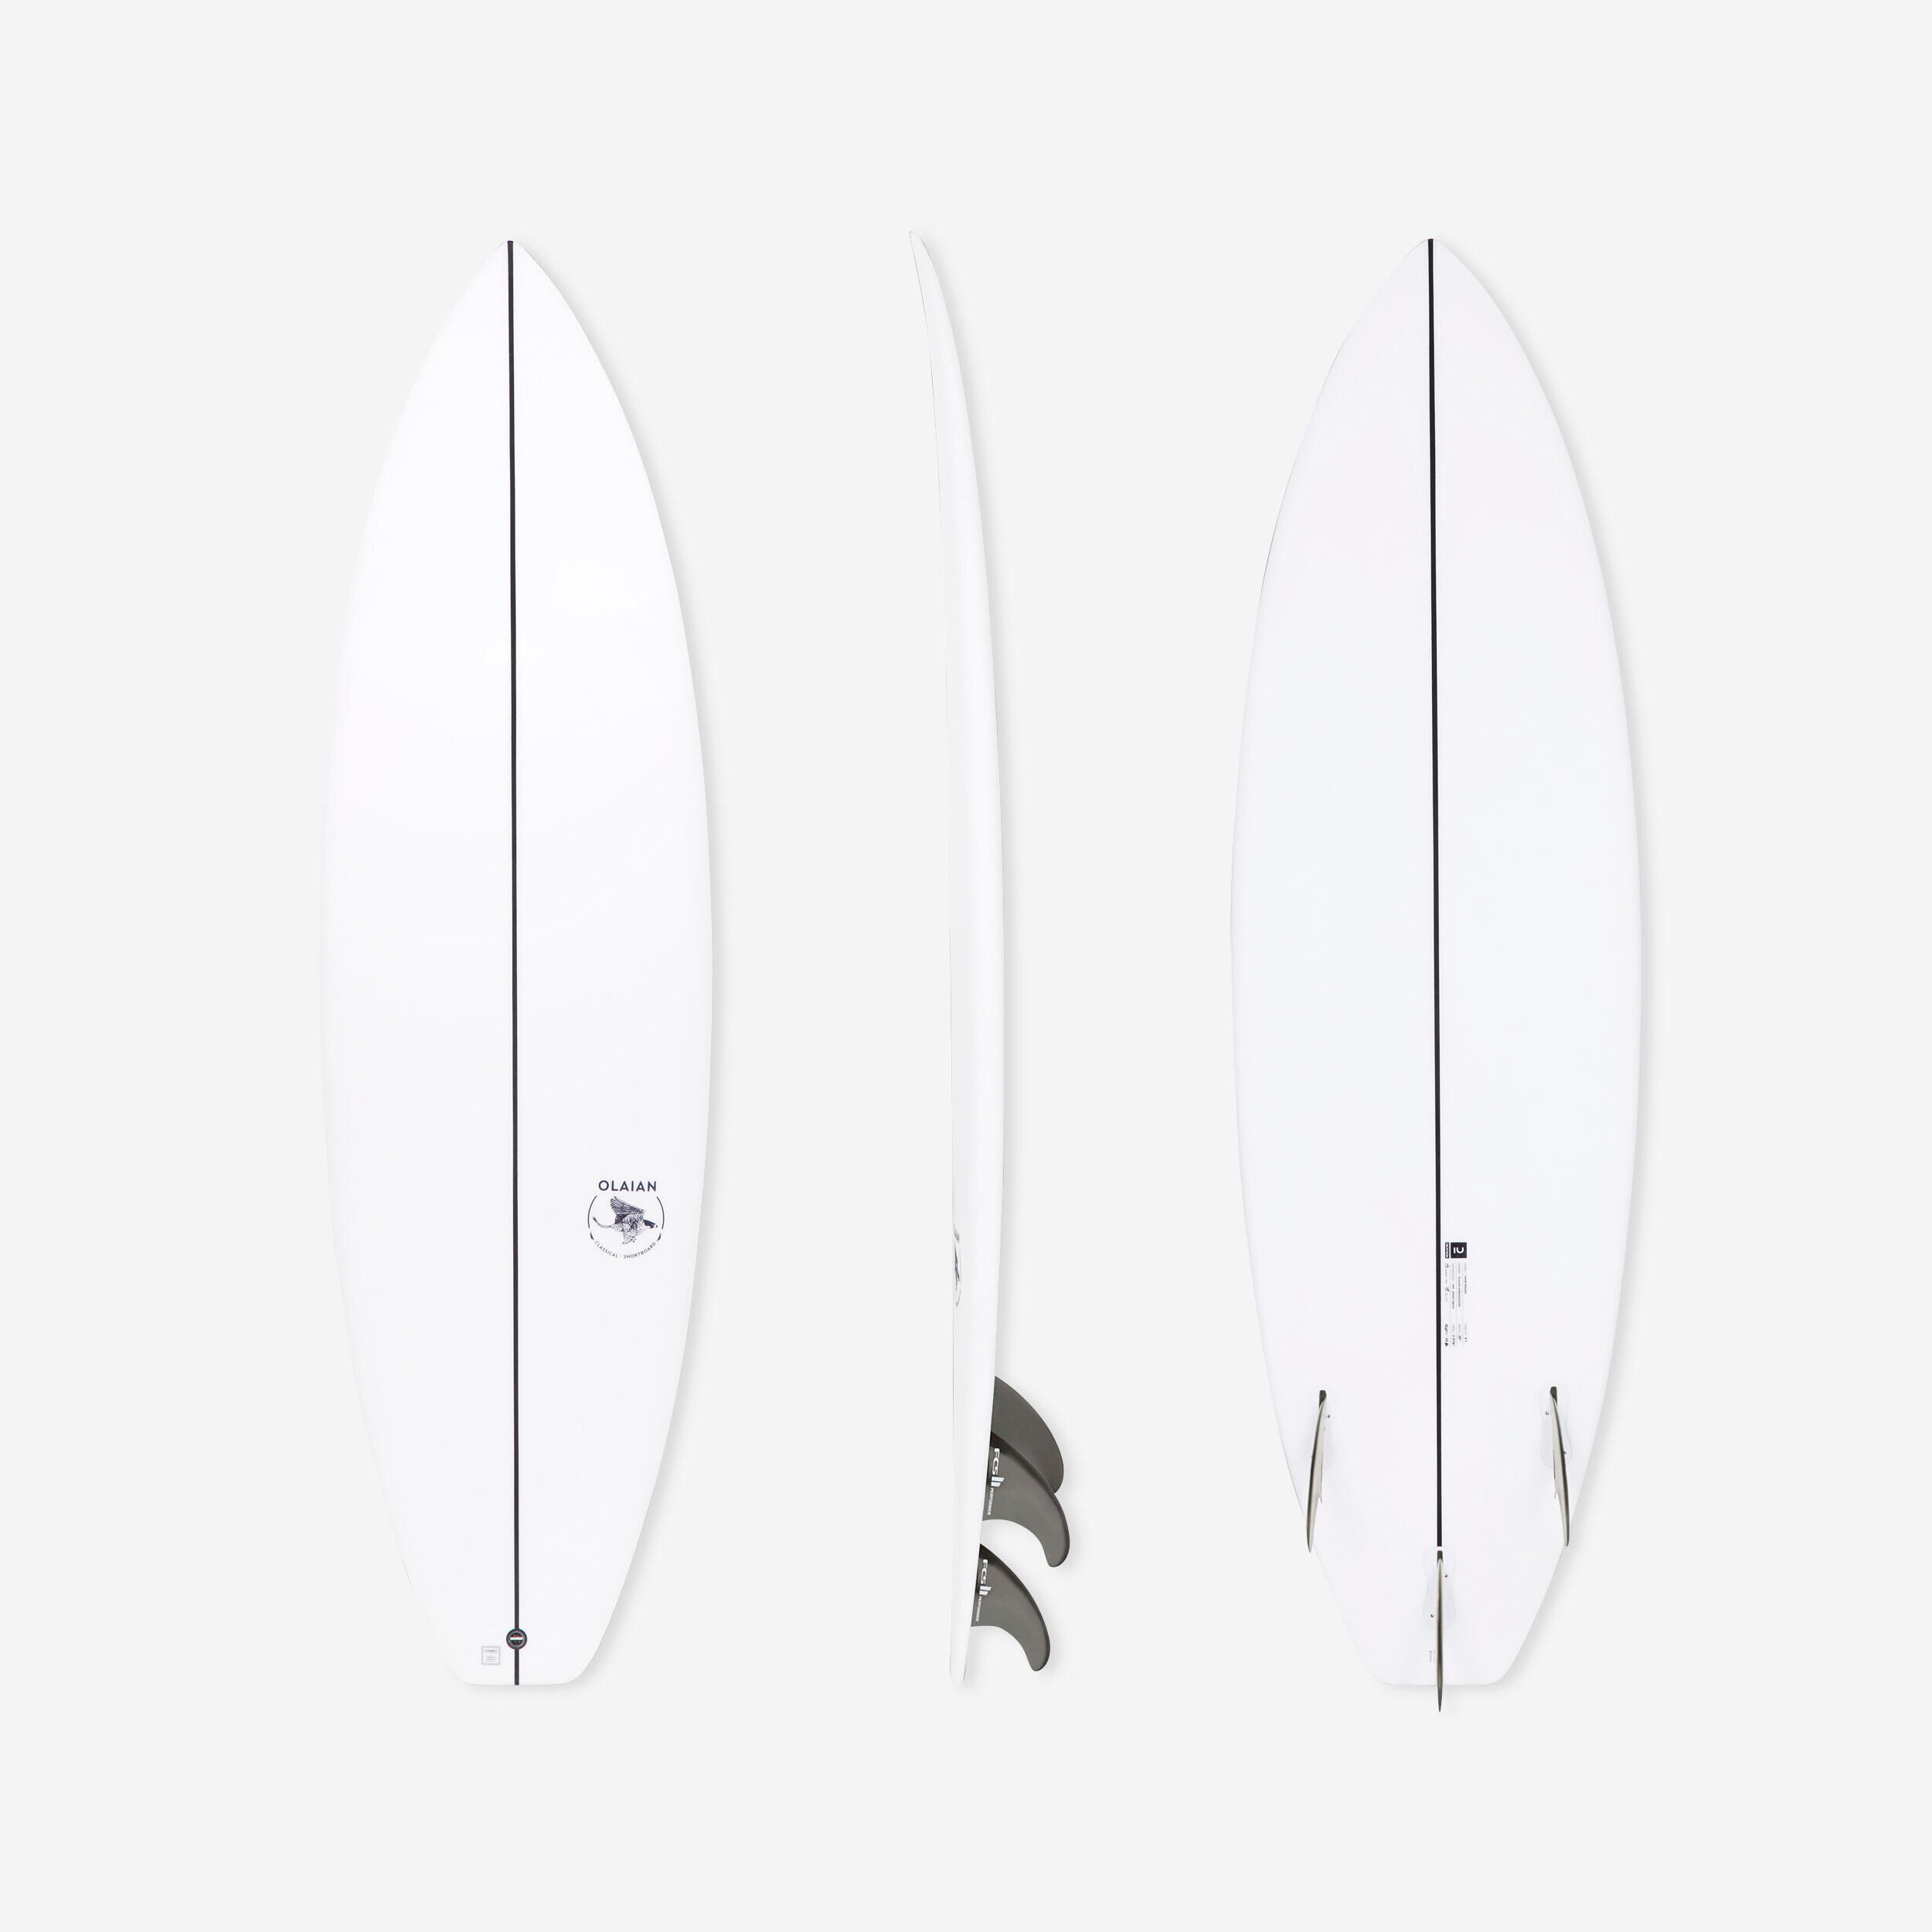 OLAIAN SHORTBOARD 900 6'1" 33 L. Supplied with 3 FCS2 fins